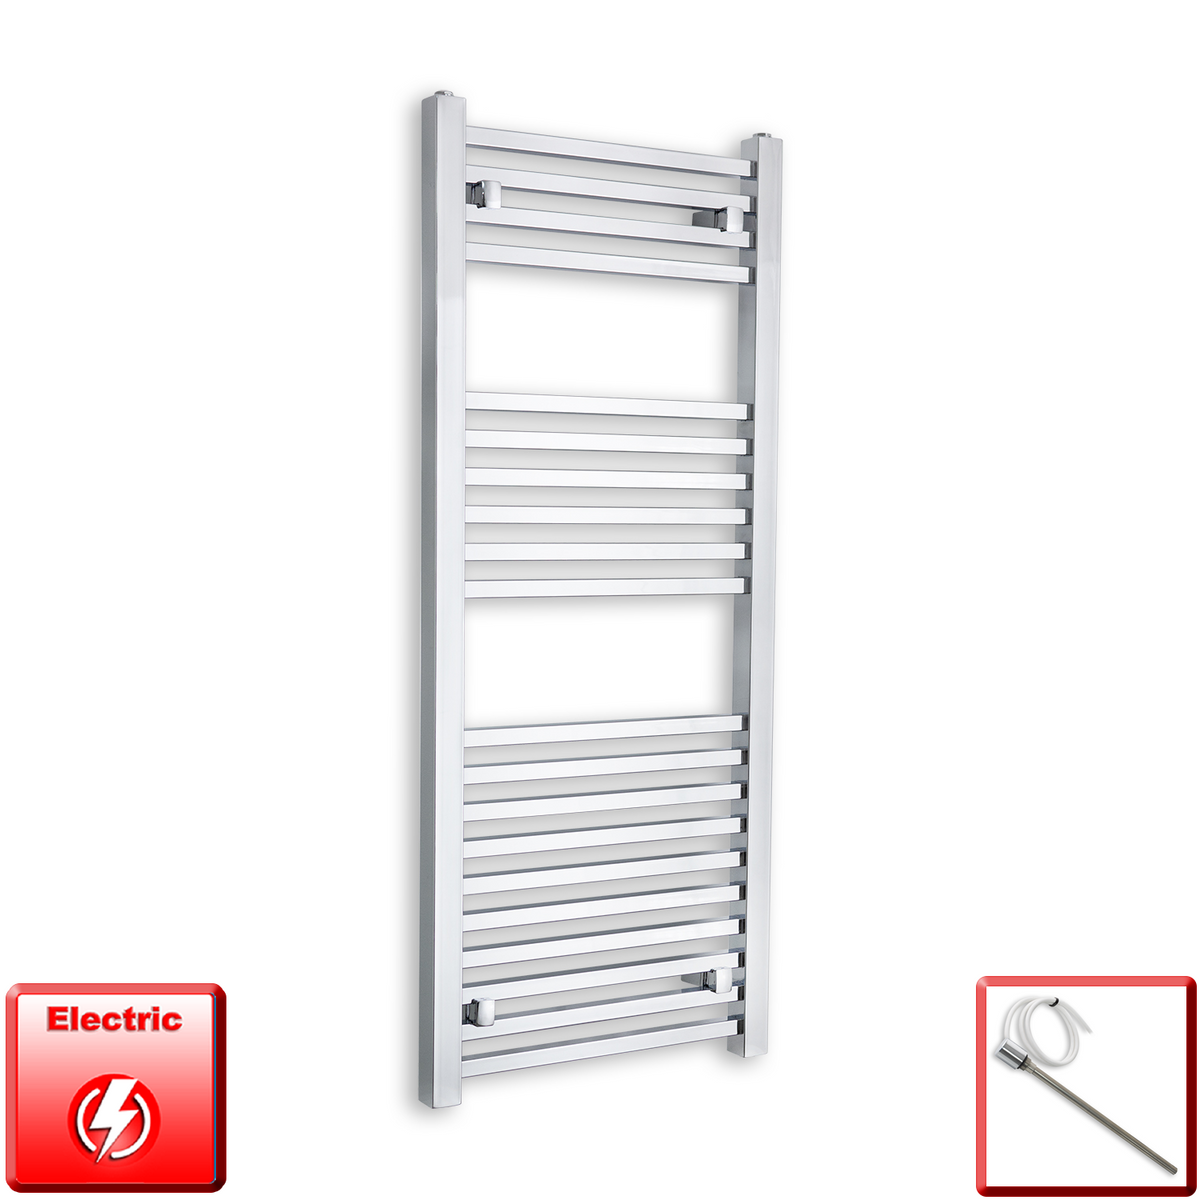 1200 x 500 Ladder Type Square Tube Flat Chrome Towel Radiator Central Heating or Electric 4